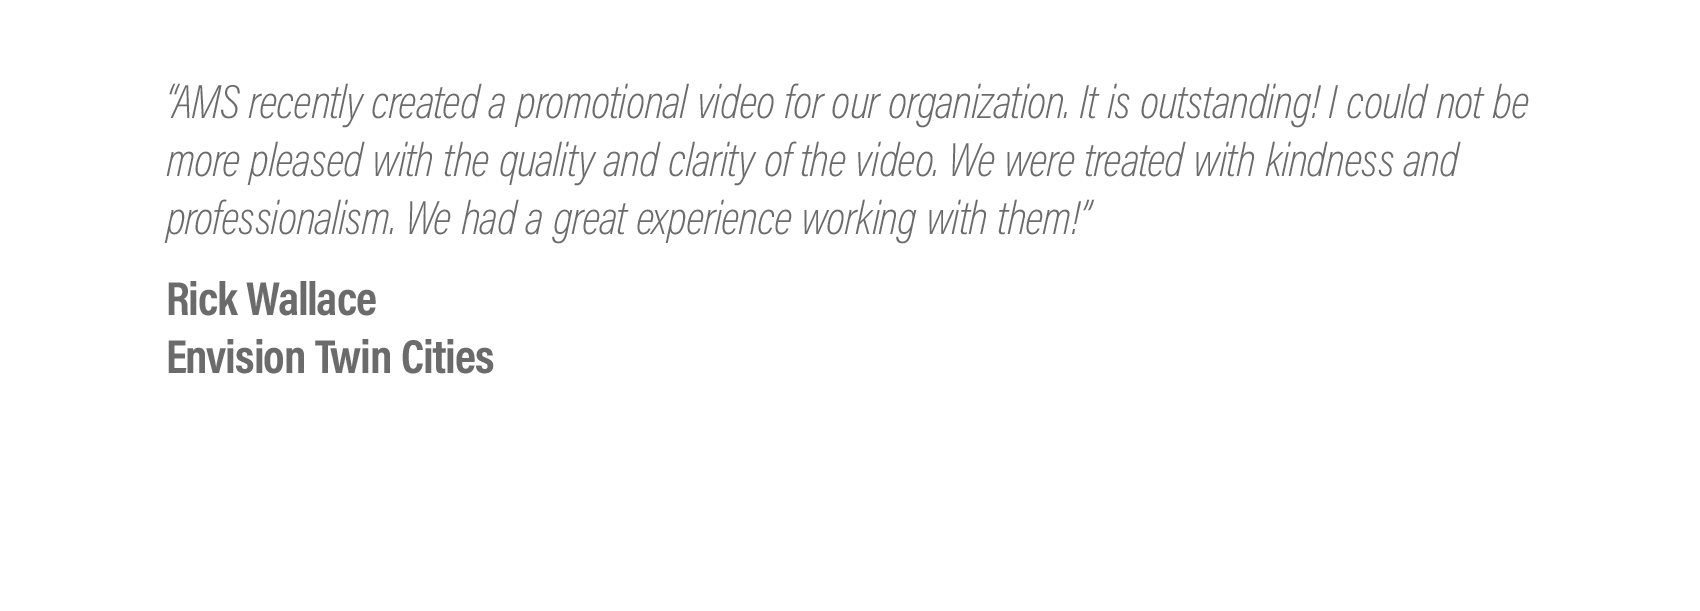  “AMS recently created a promotional video for our organization. It is outstanding! I could not be more pleased with the quality and clarity of the video. We were treated with kindness and professionalism. We had a great experience working with them!